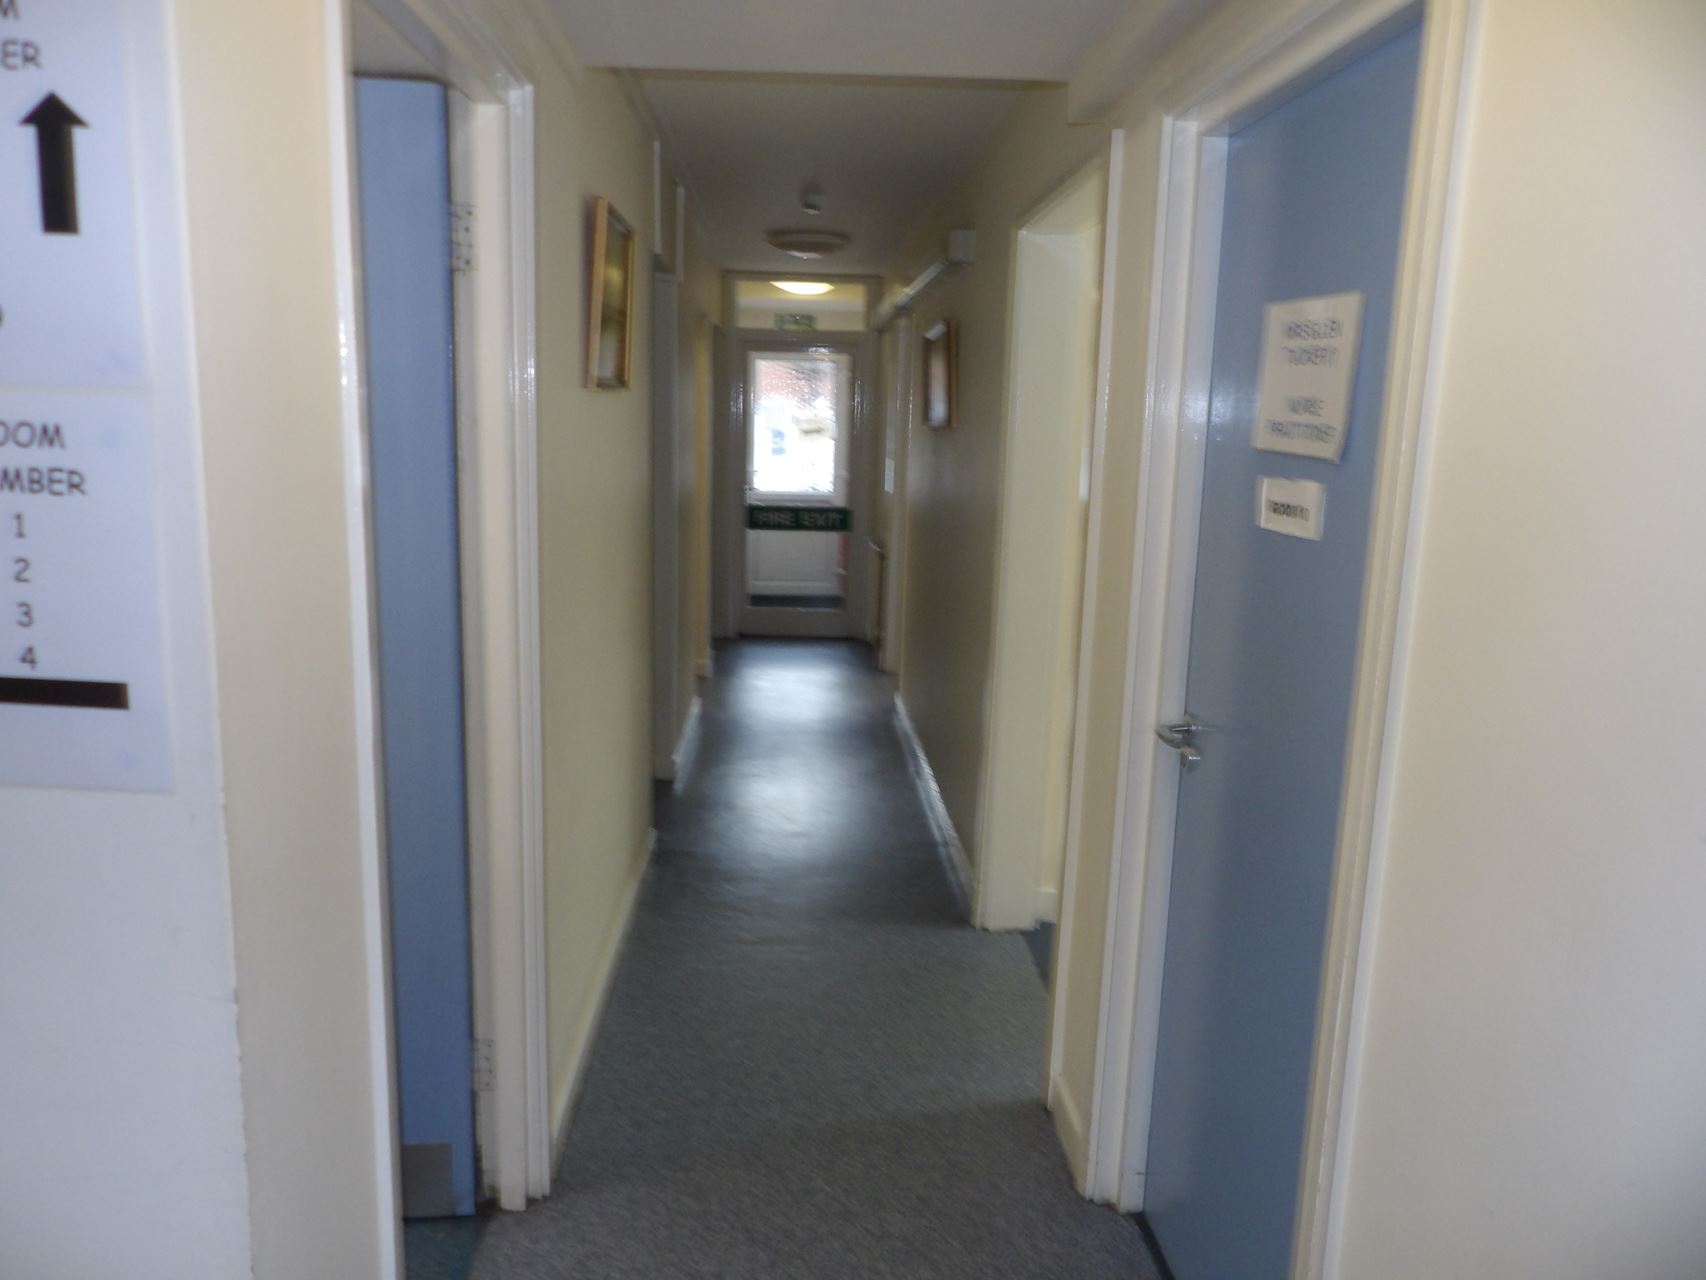 Downstairs Consulting Rooms